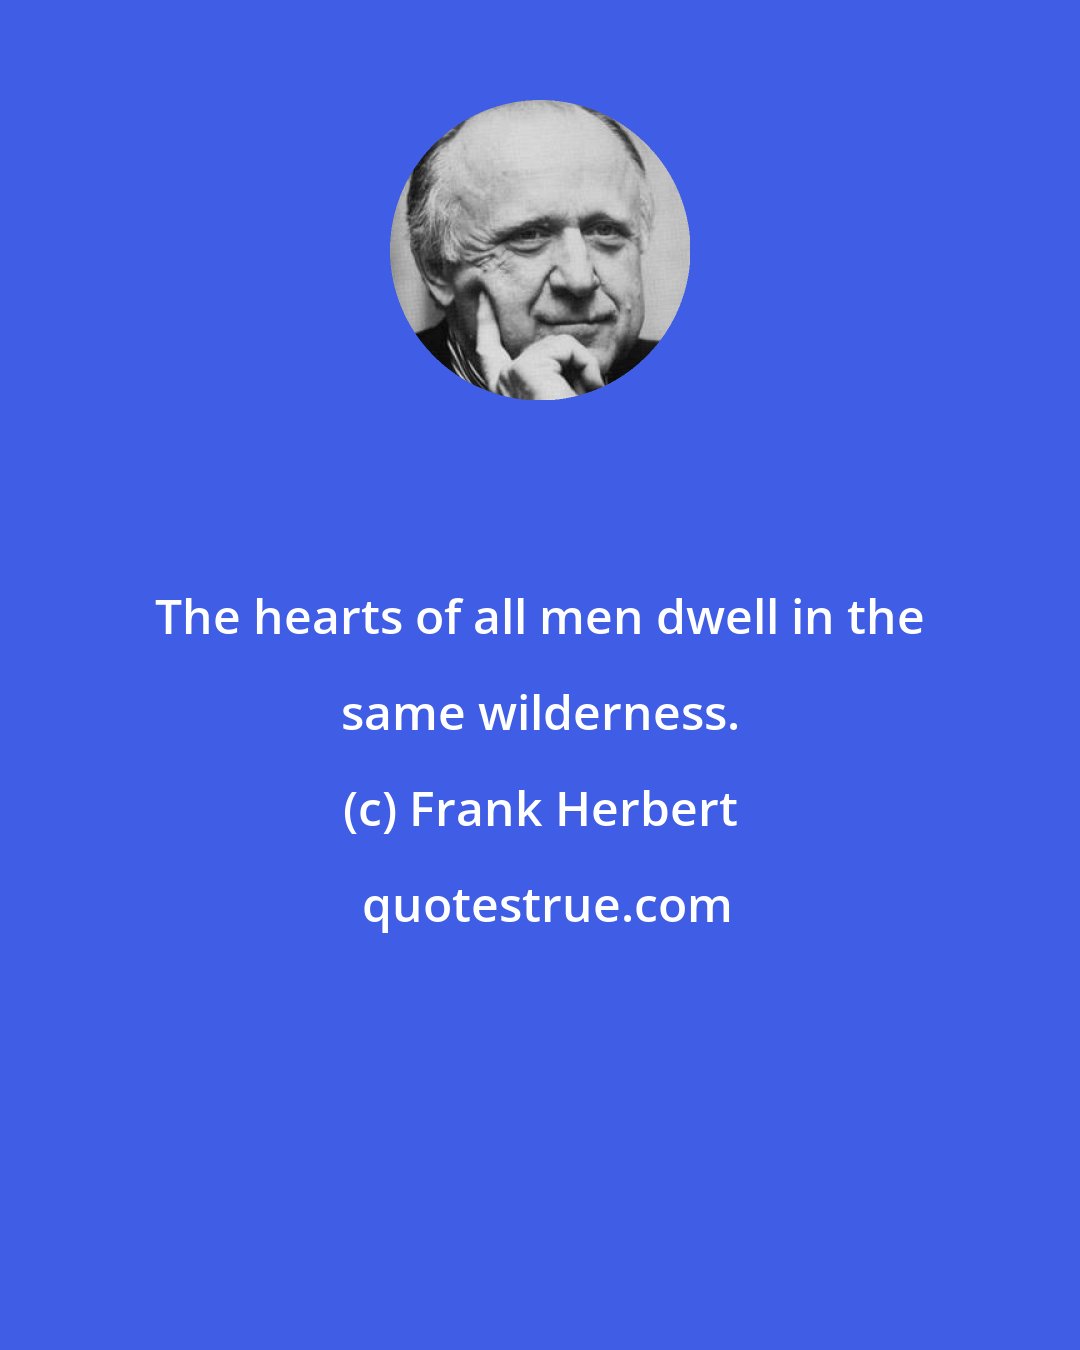 Frank Herbert: The hearts of all men dwell in the same wilderness.